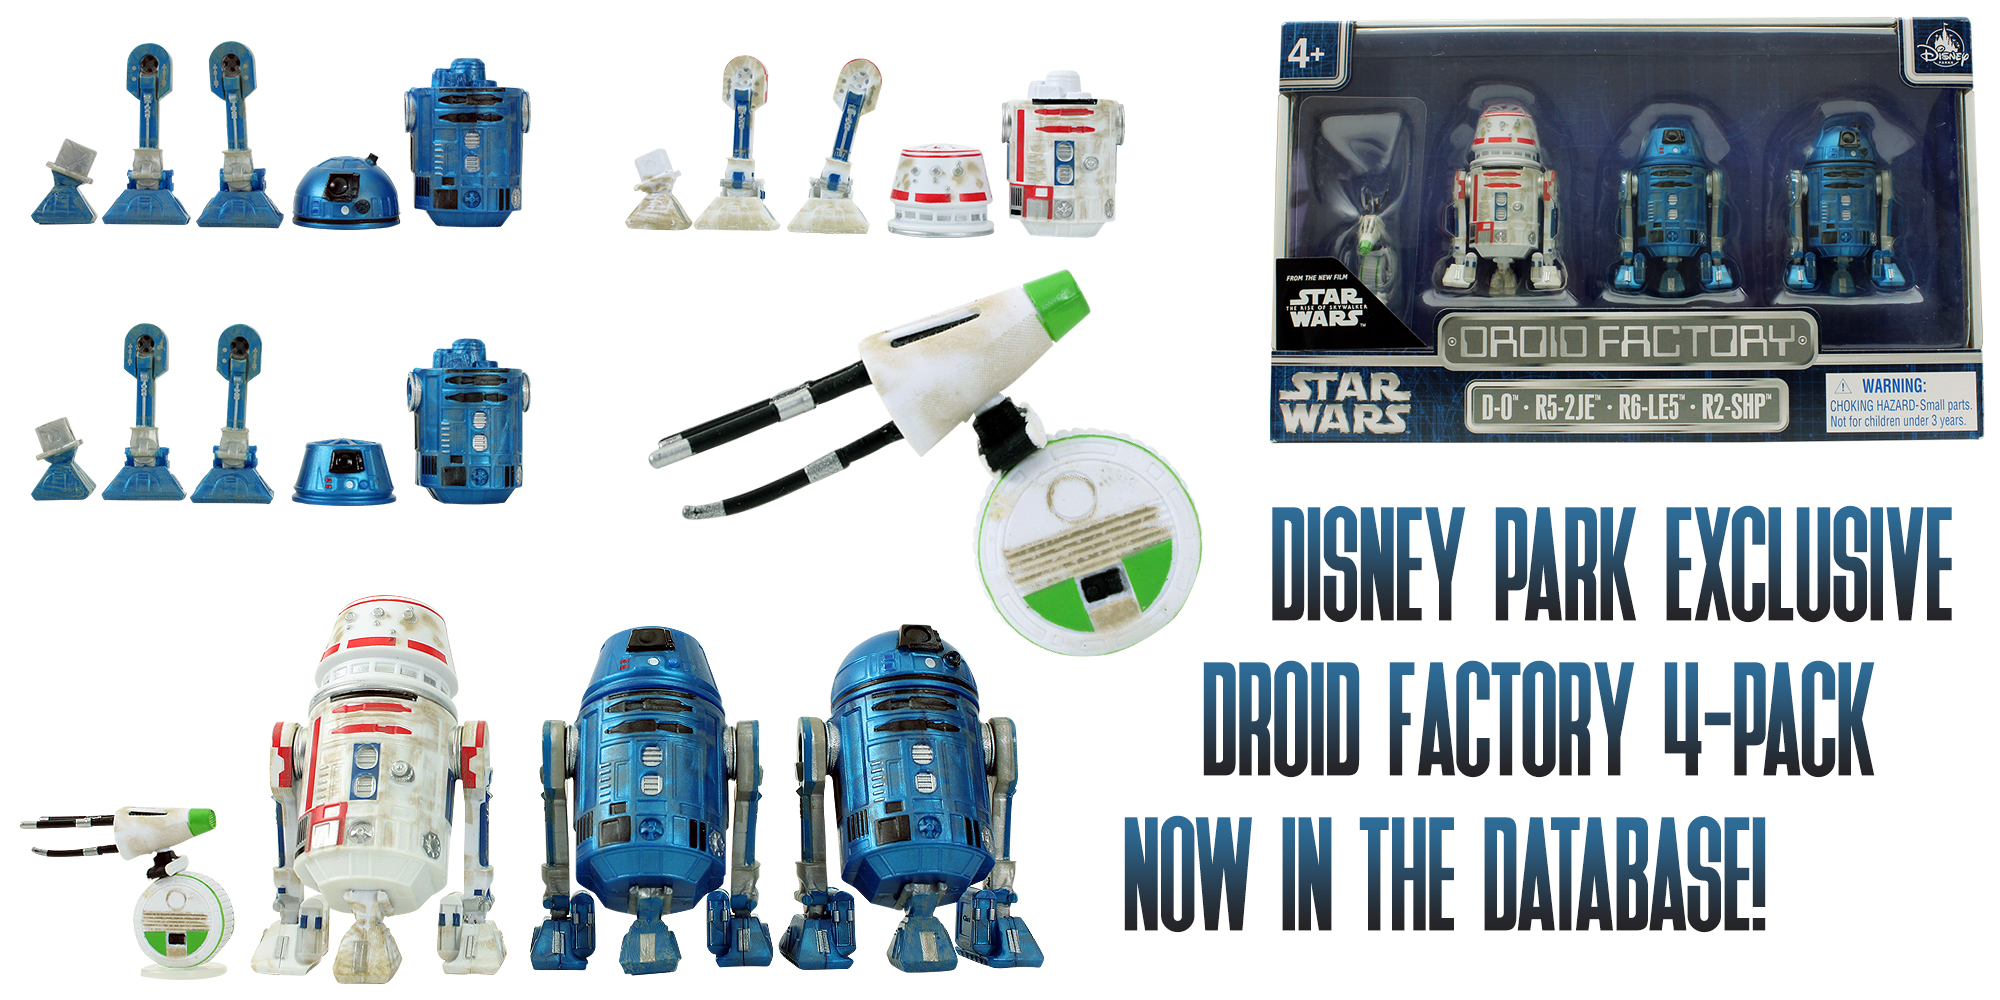 New In The Database: Droid Factory 4-Pack